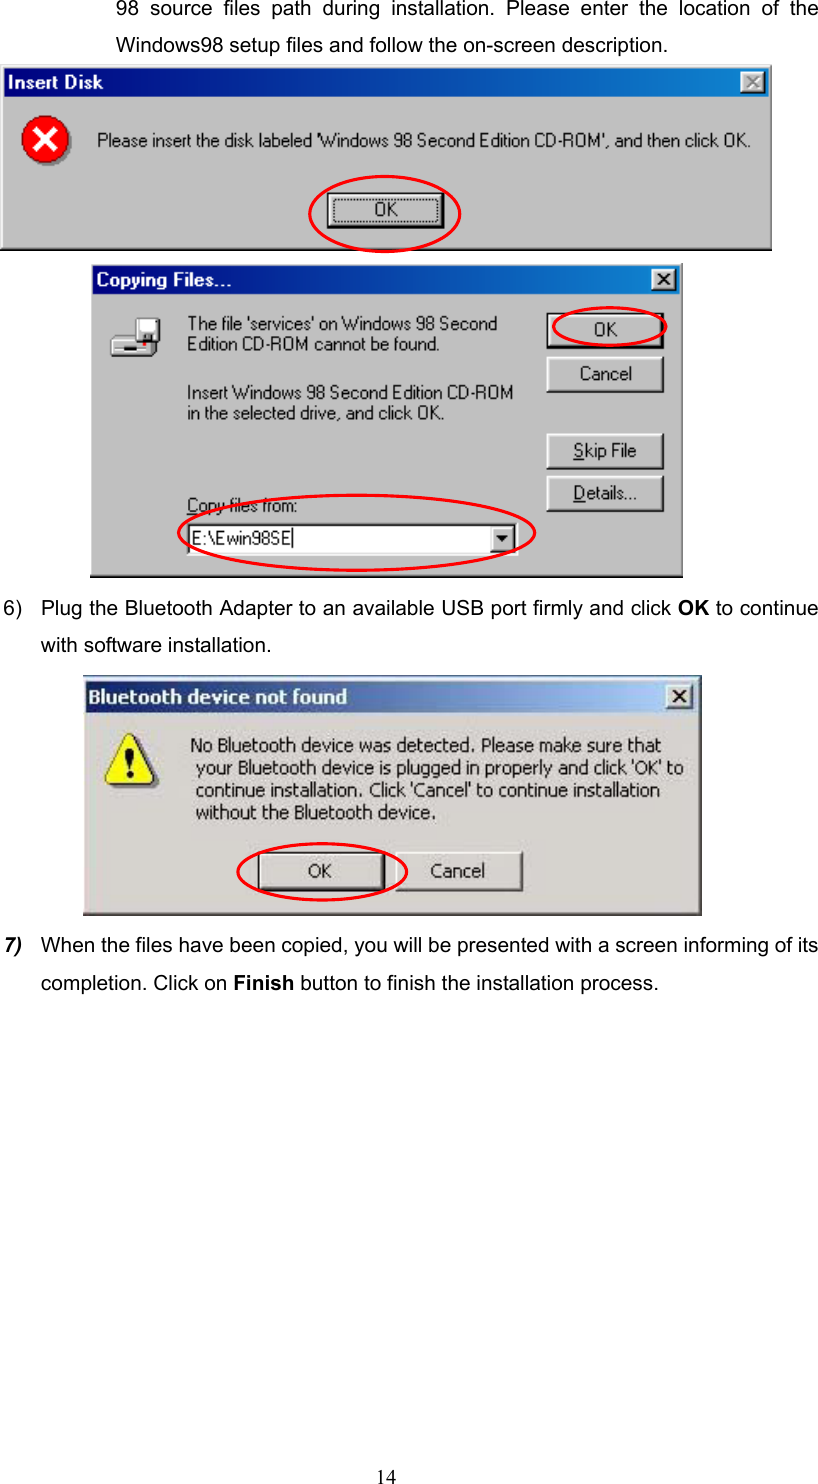  14 98 source files path during installation. Please enter the location of the Windows98 setup files and follow the on-screen description.   6)  Plug the Bluetooth Adapter to an available USB port firmly and click OK to continue with software installation.  7)  When the files have been copied, you will be presented with a screen informing of its completion. Click on Finish button to finish the installation process. 